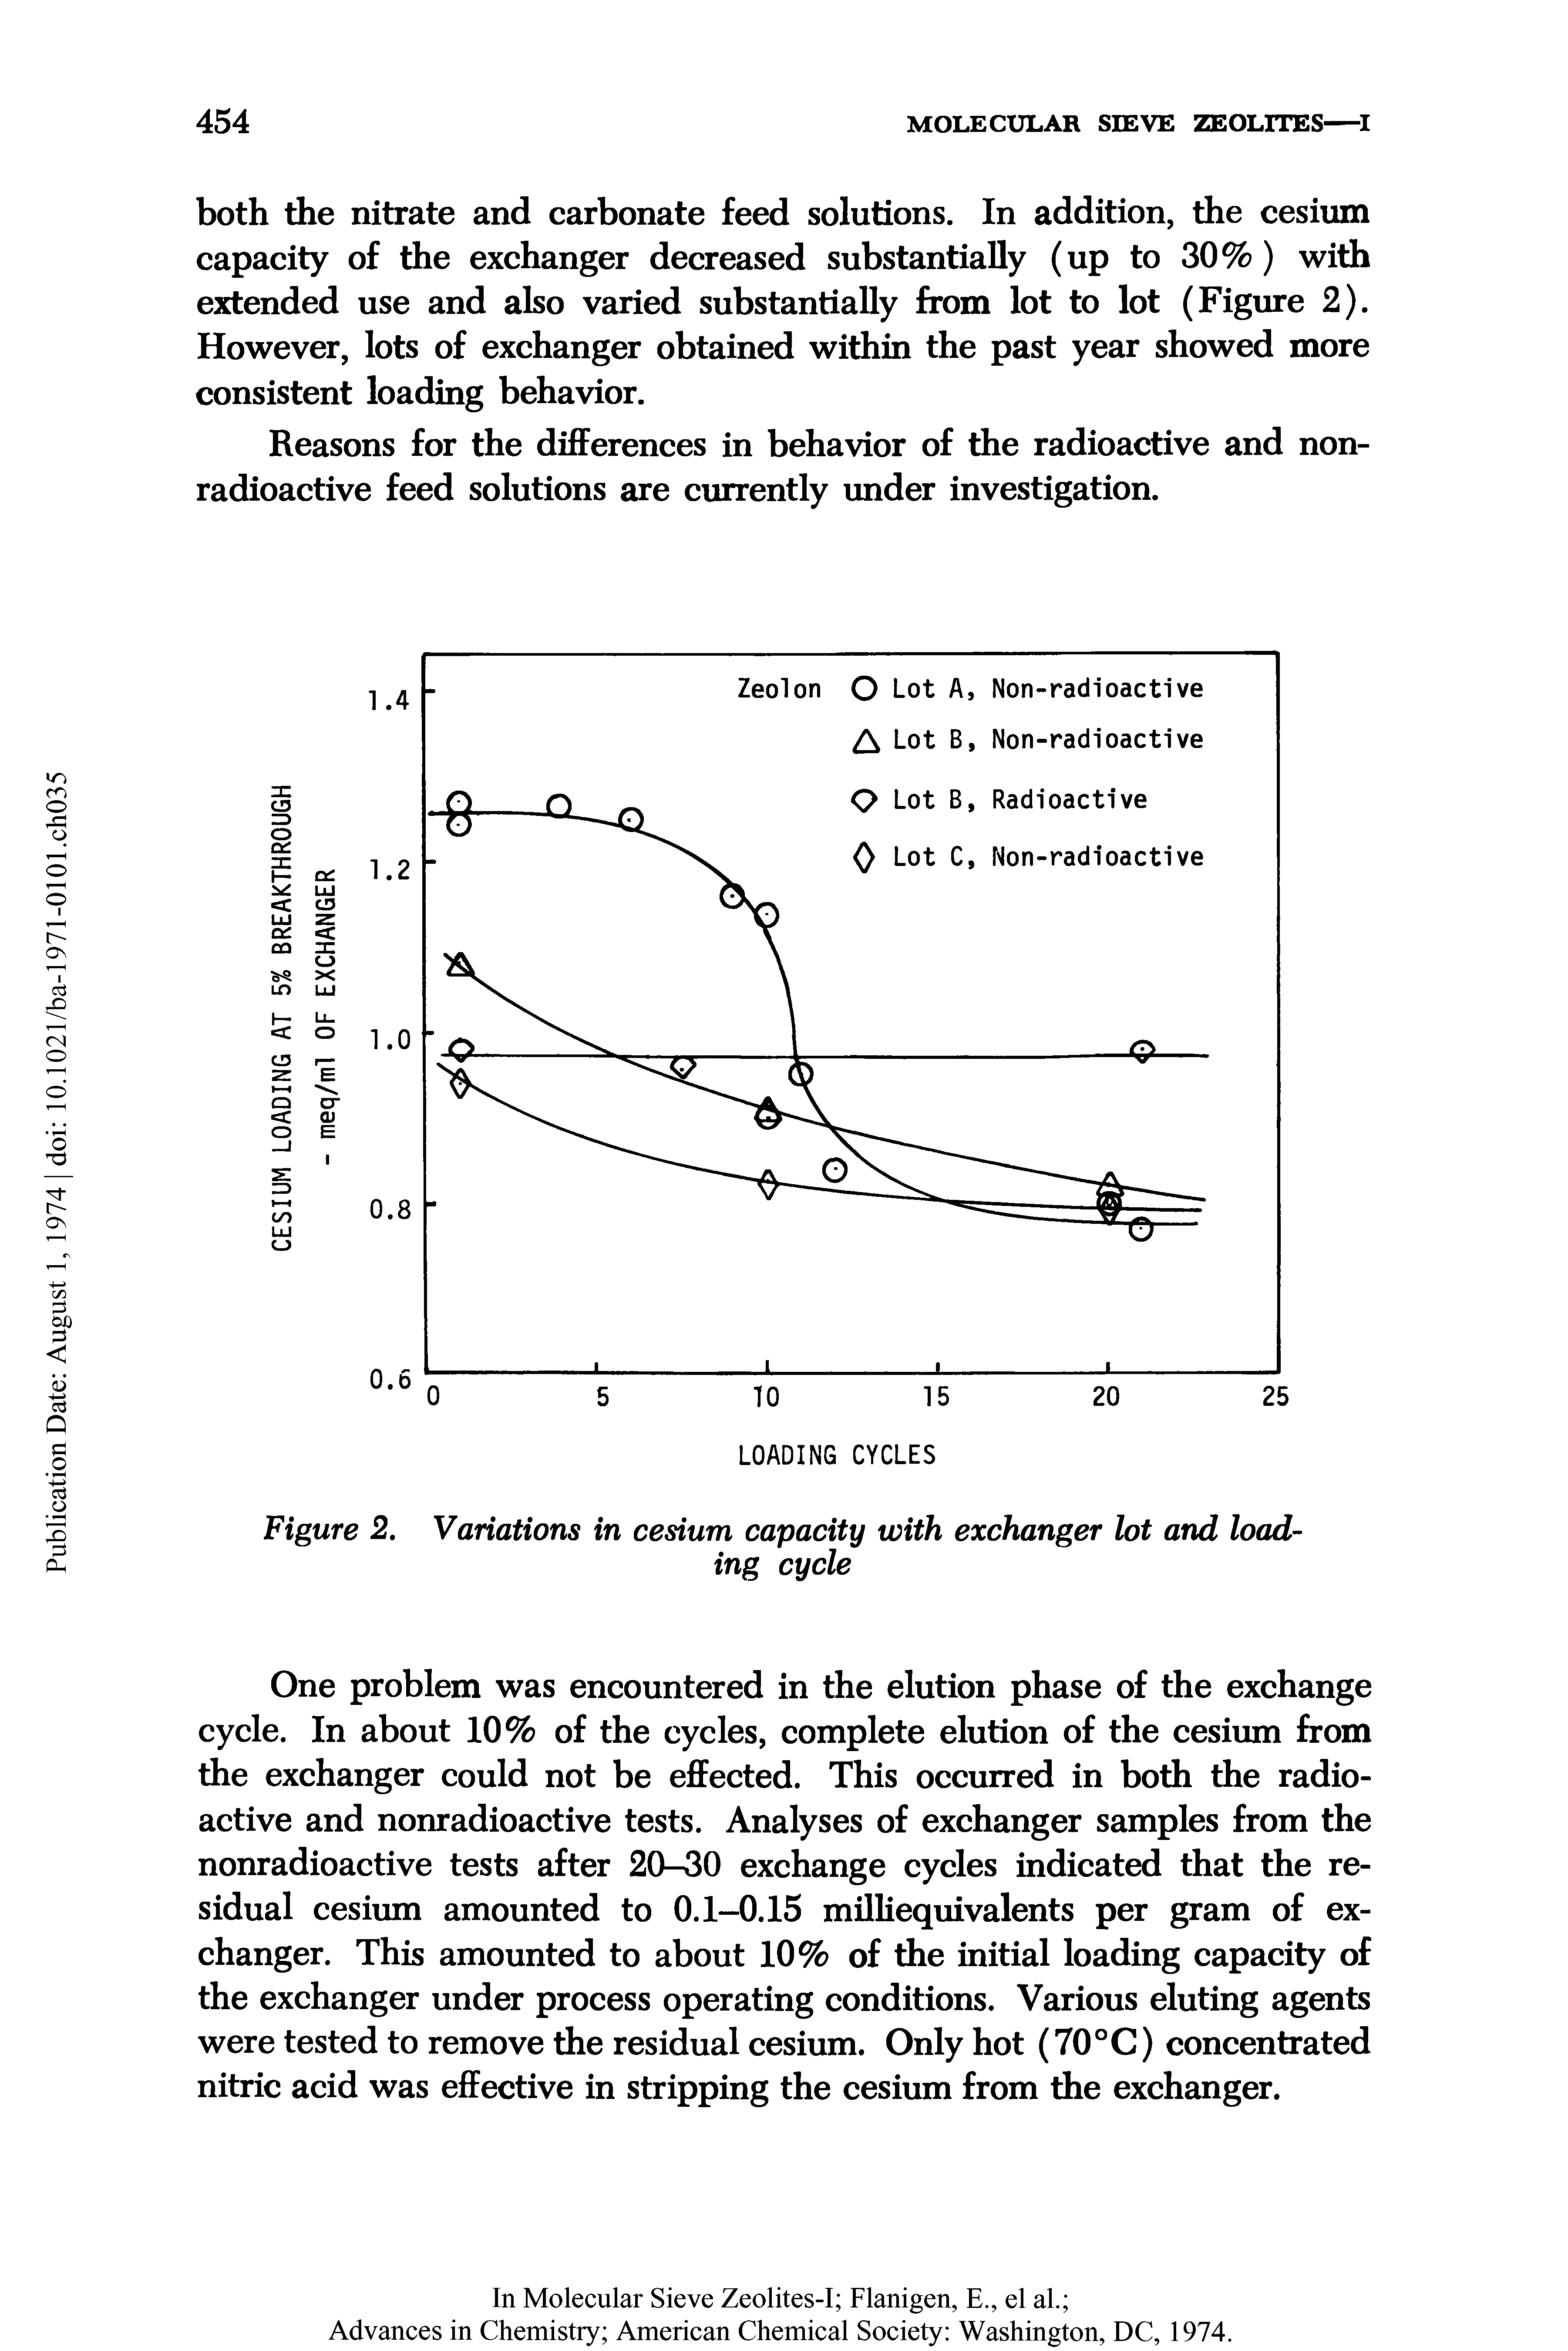 Figure 2. Variations in cesium capacity with exchanger lot and loading cycle...